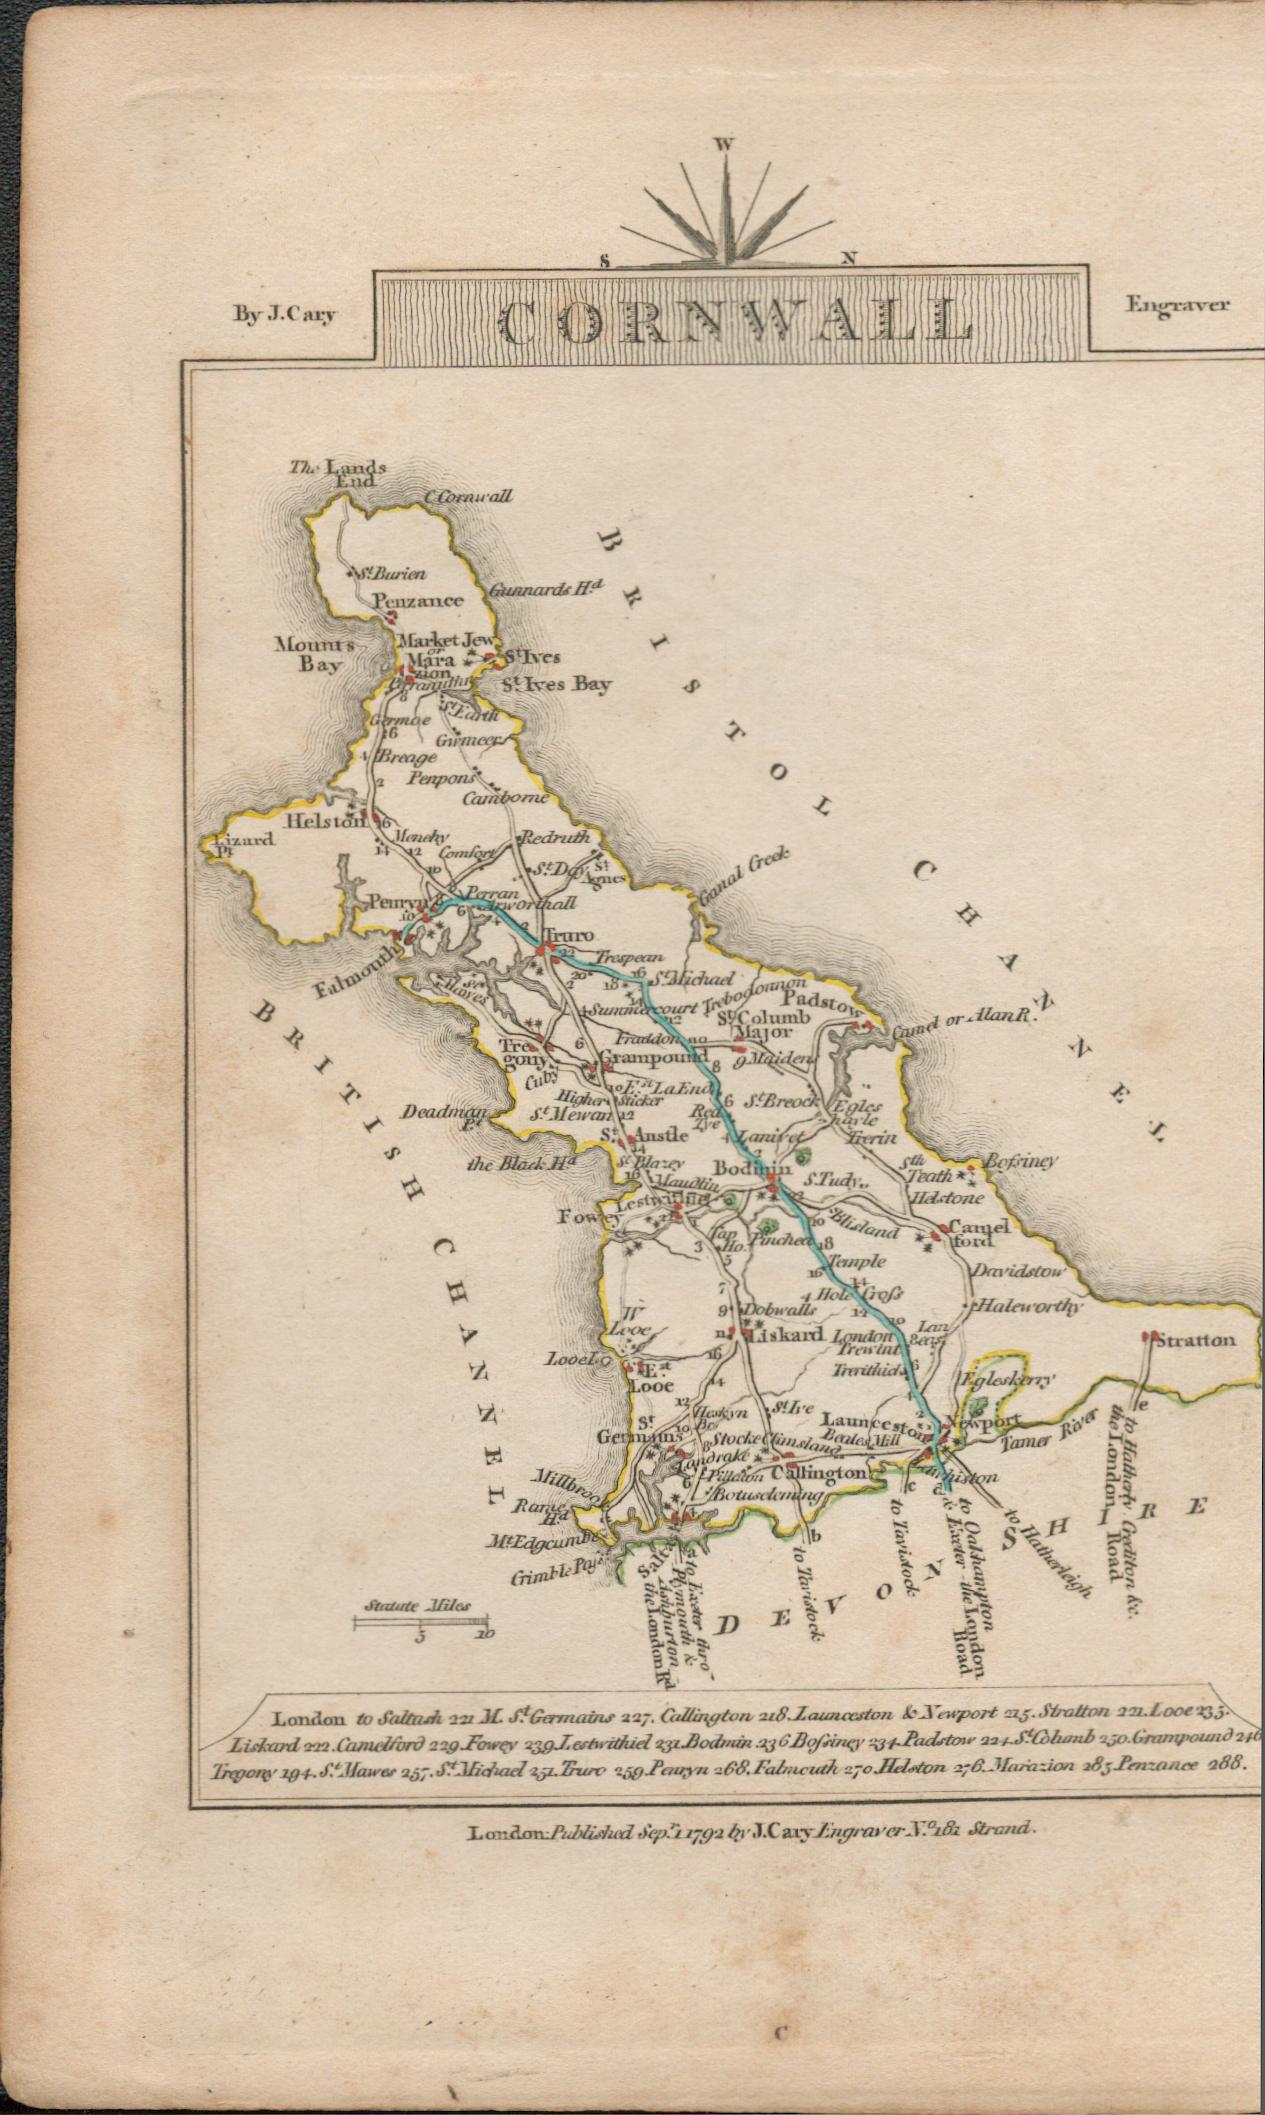 John Cary’s 1791 Antique Copper Engraved Map Cornwall & Cheshire.